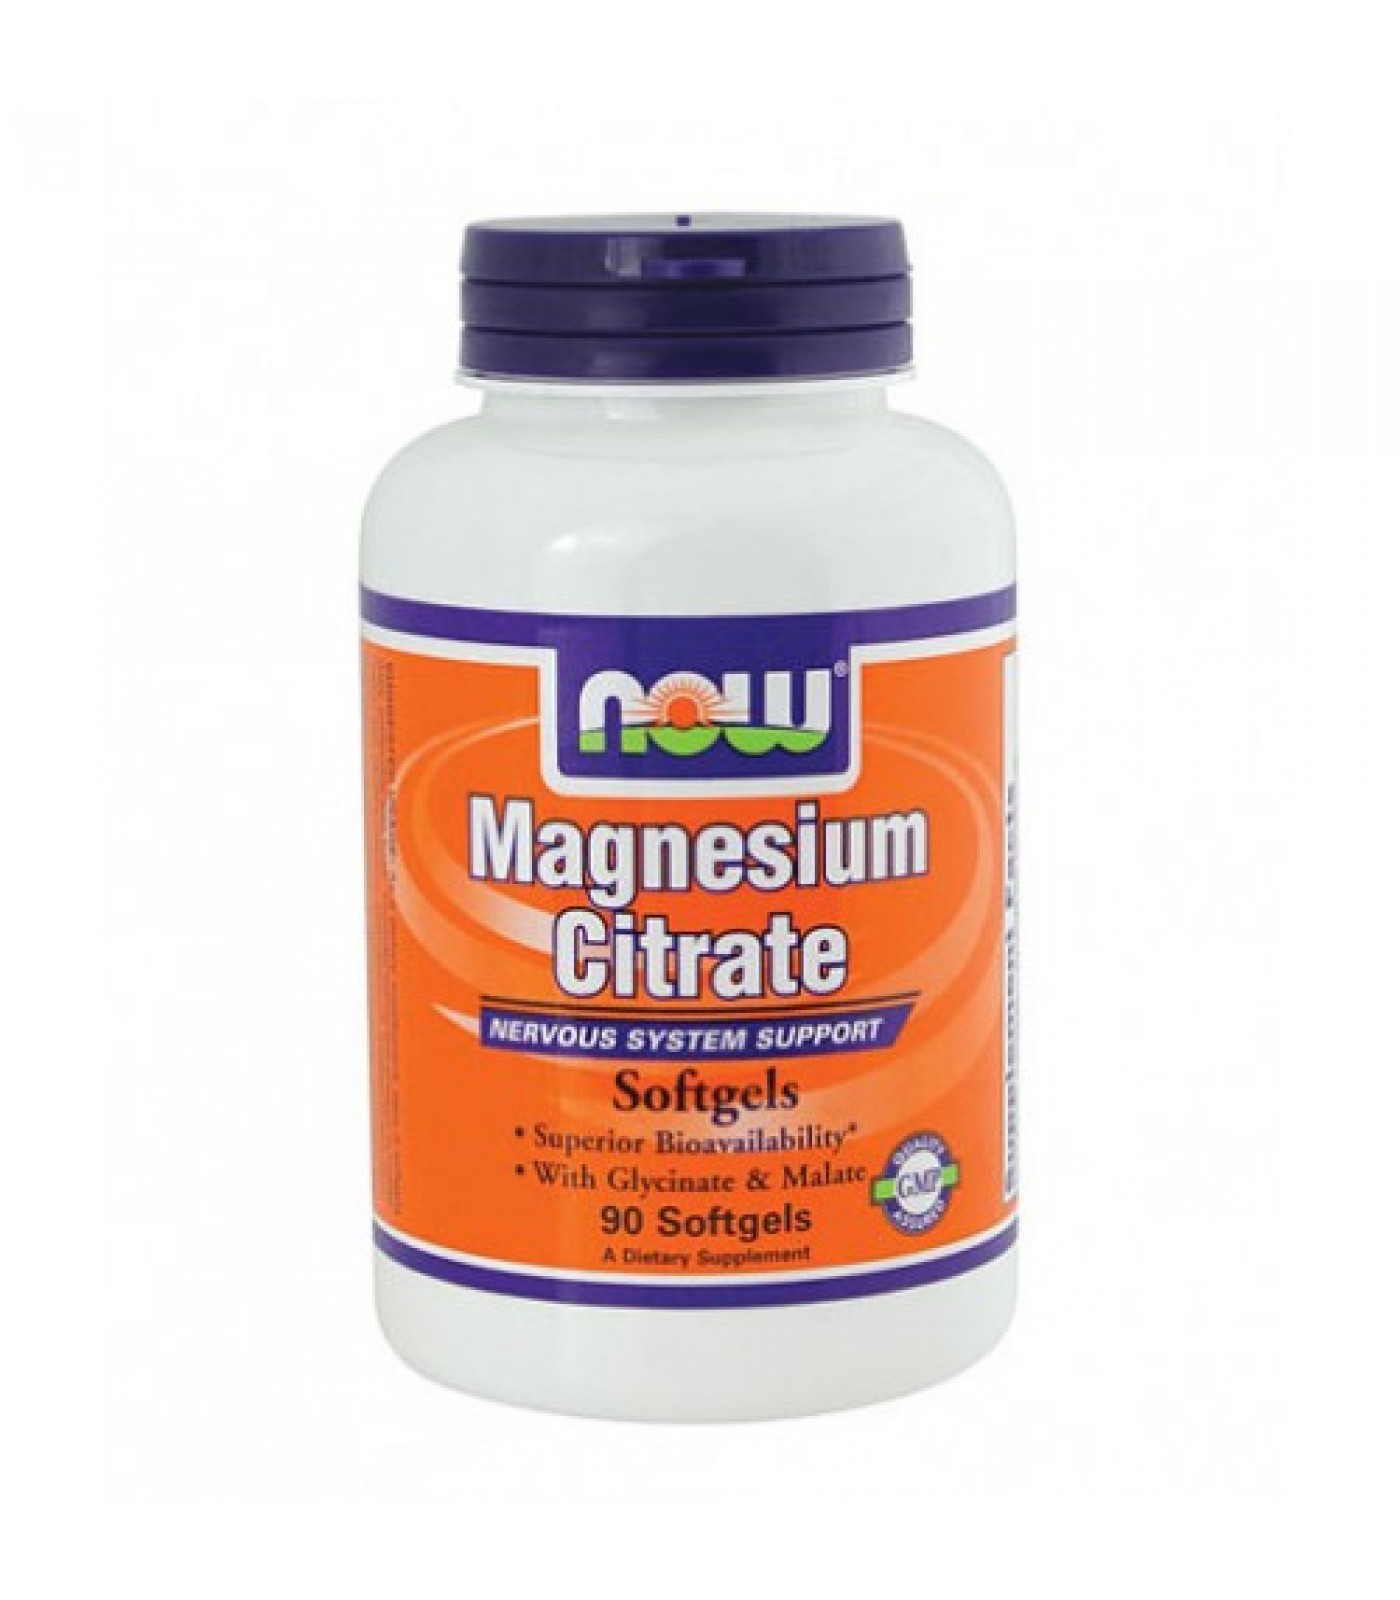 NOW - Magnesium Citrate 134mg. / 90 Softgels